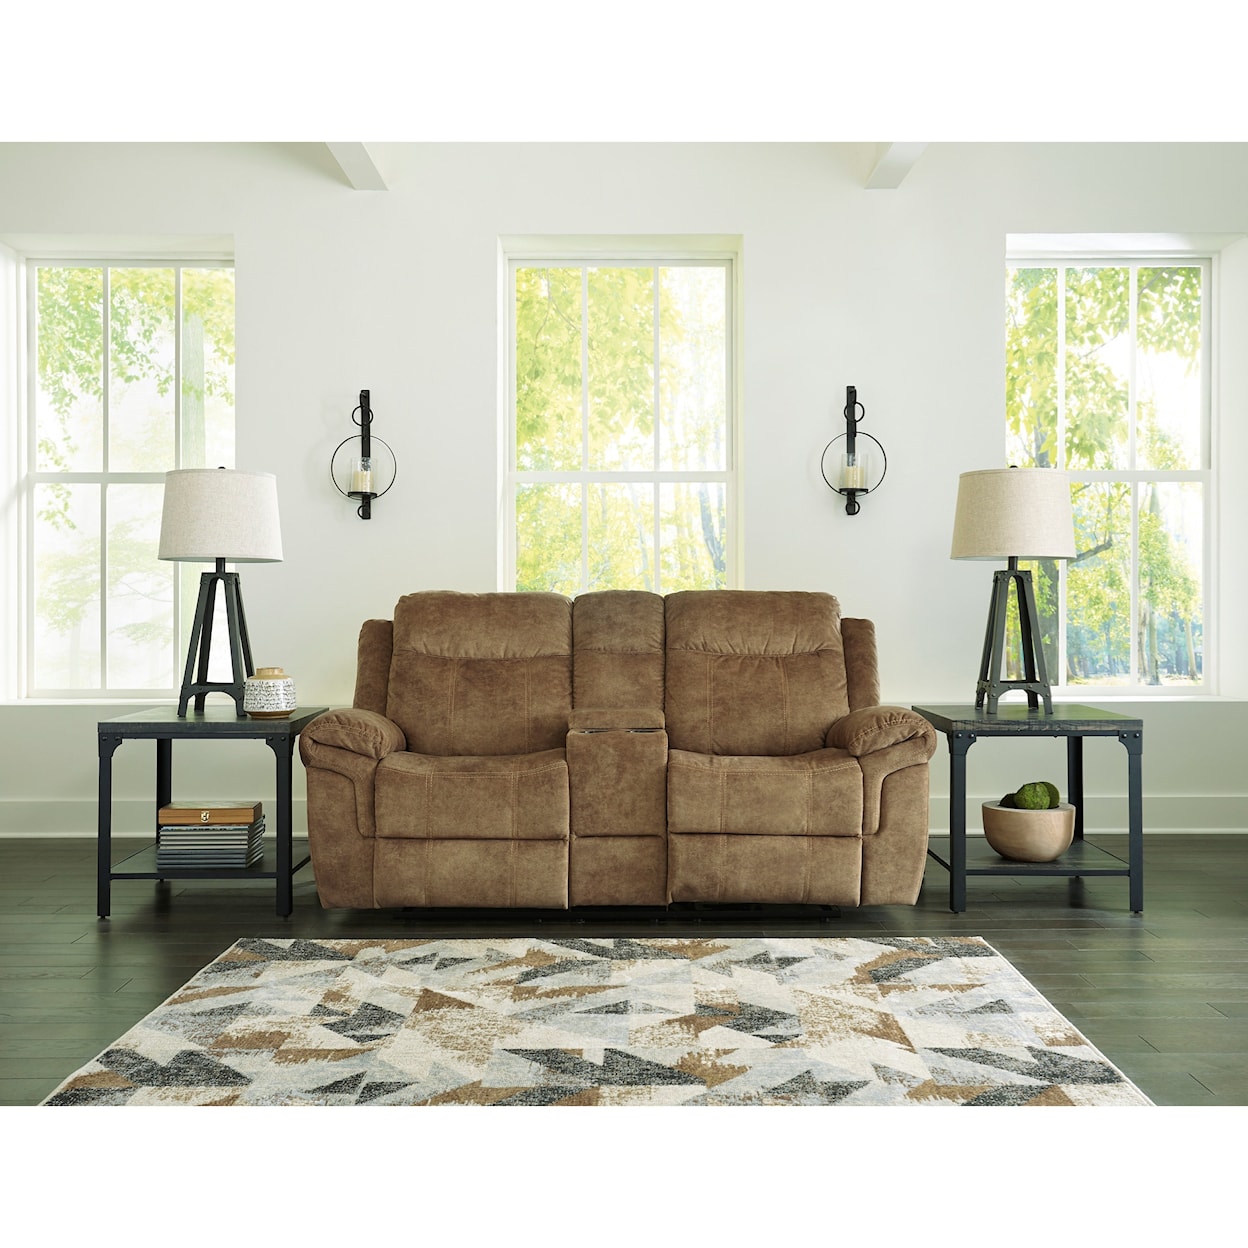 Michael Alan Select Huddle-Up Double Reclining Loveseat w/ Console